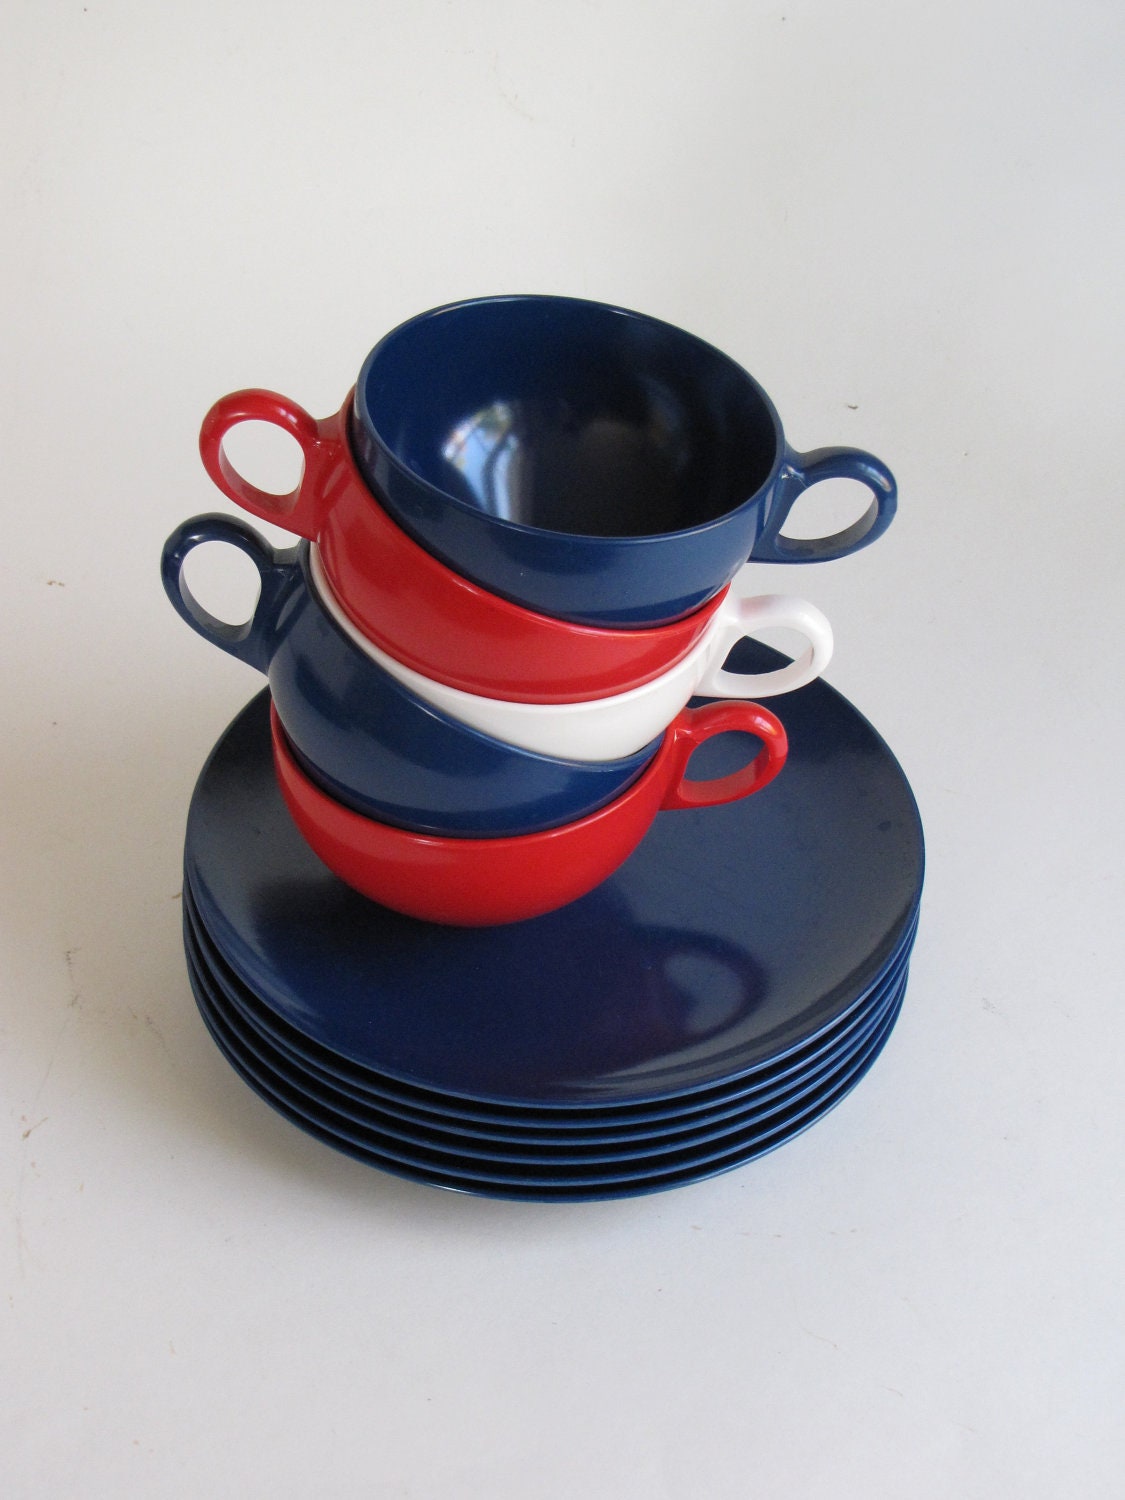 Vintage Patriotic Red White and Blue Melmac Dishes - 5 cups, 6 Plates